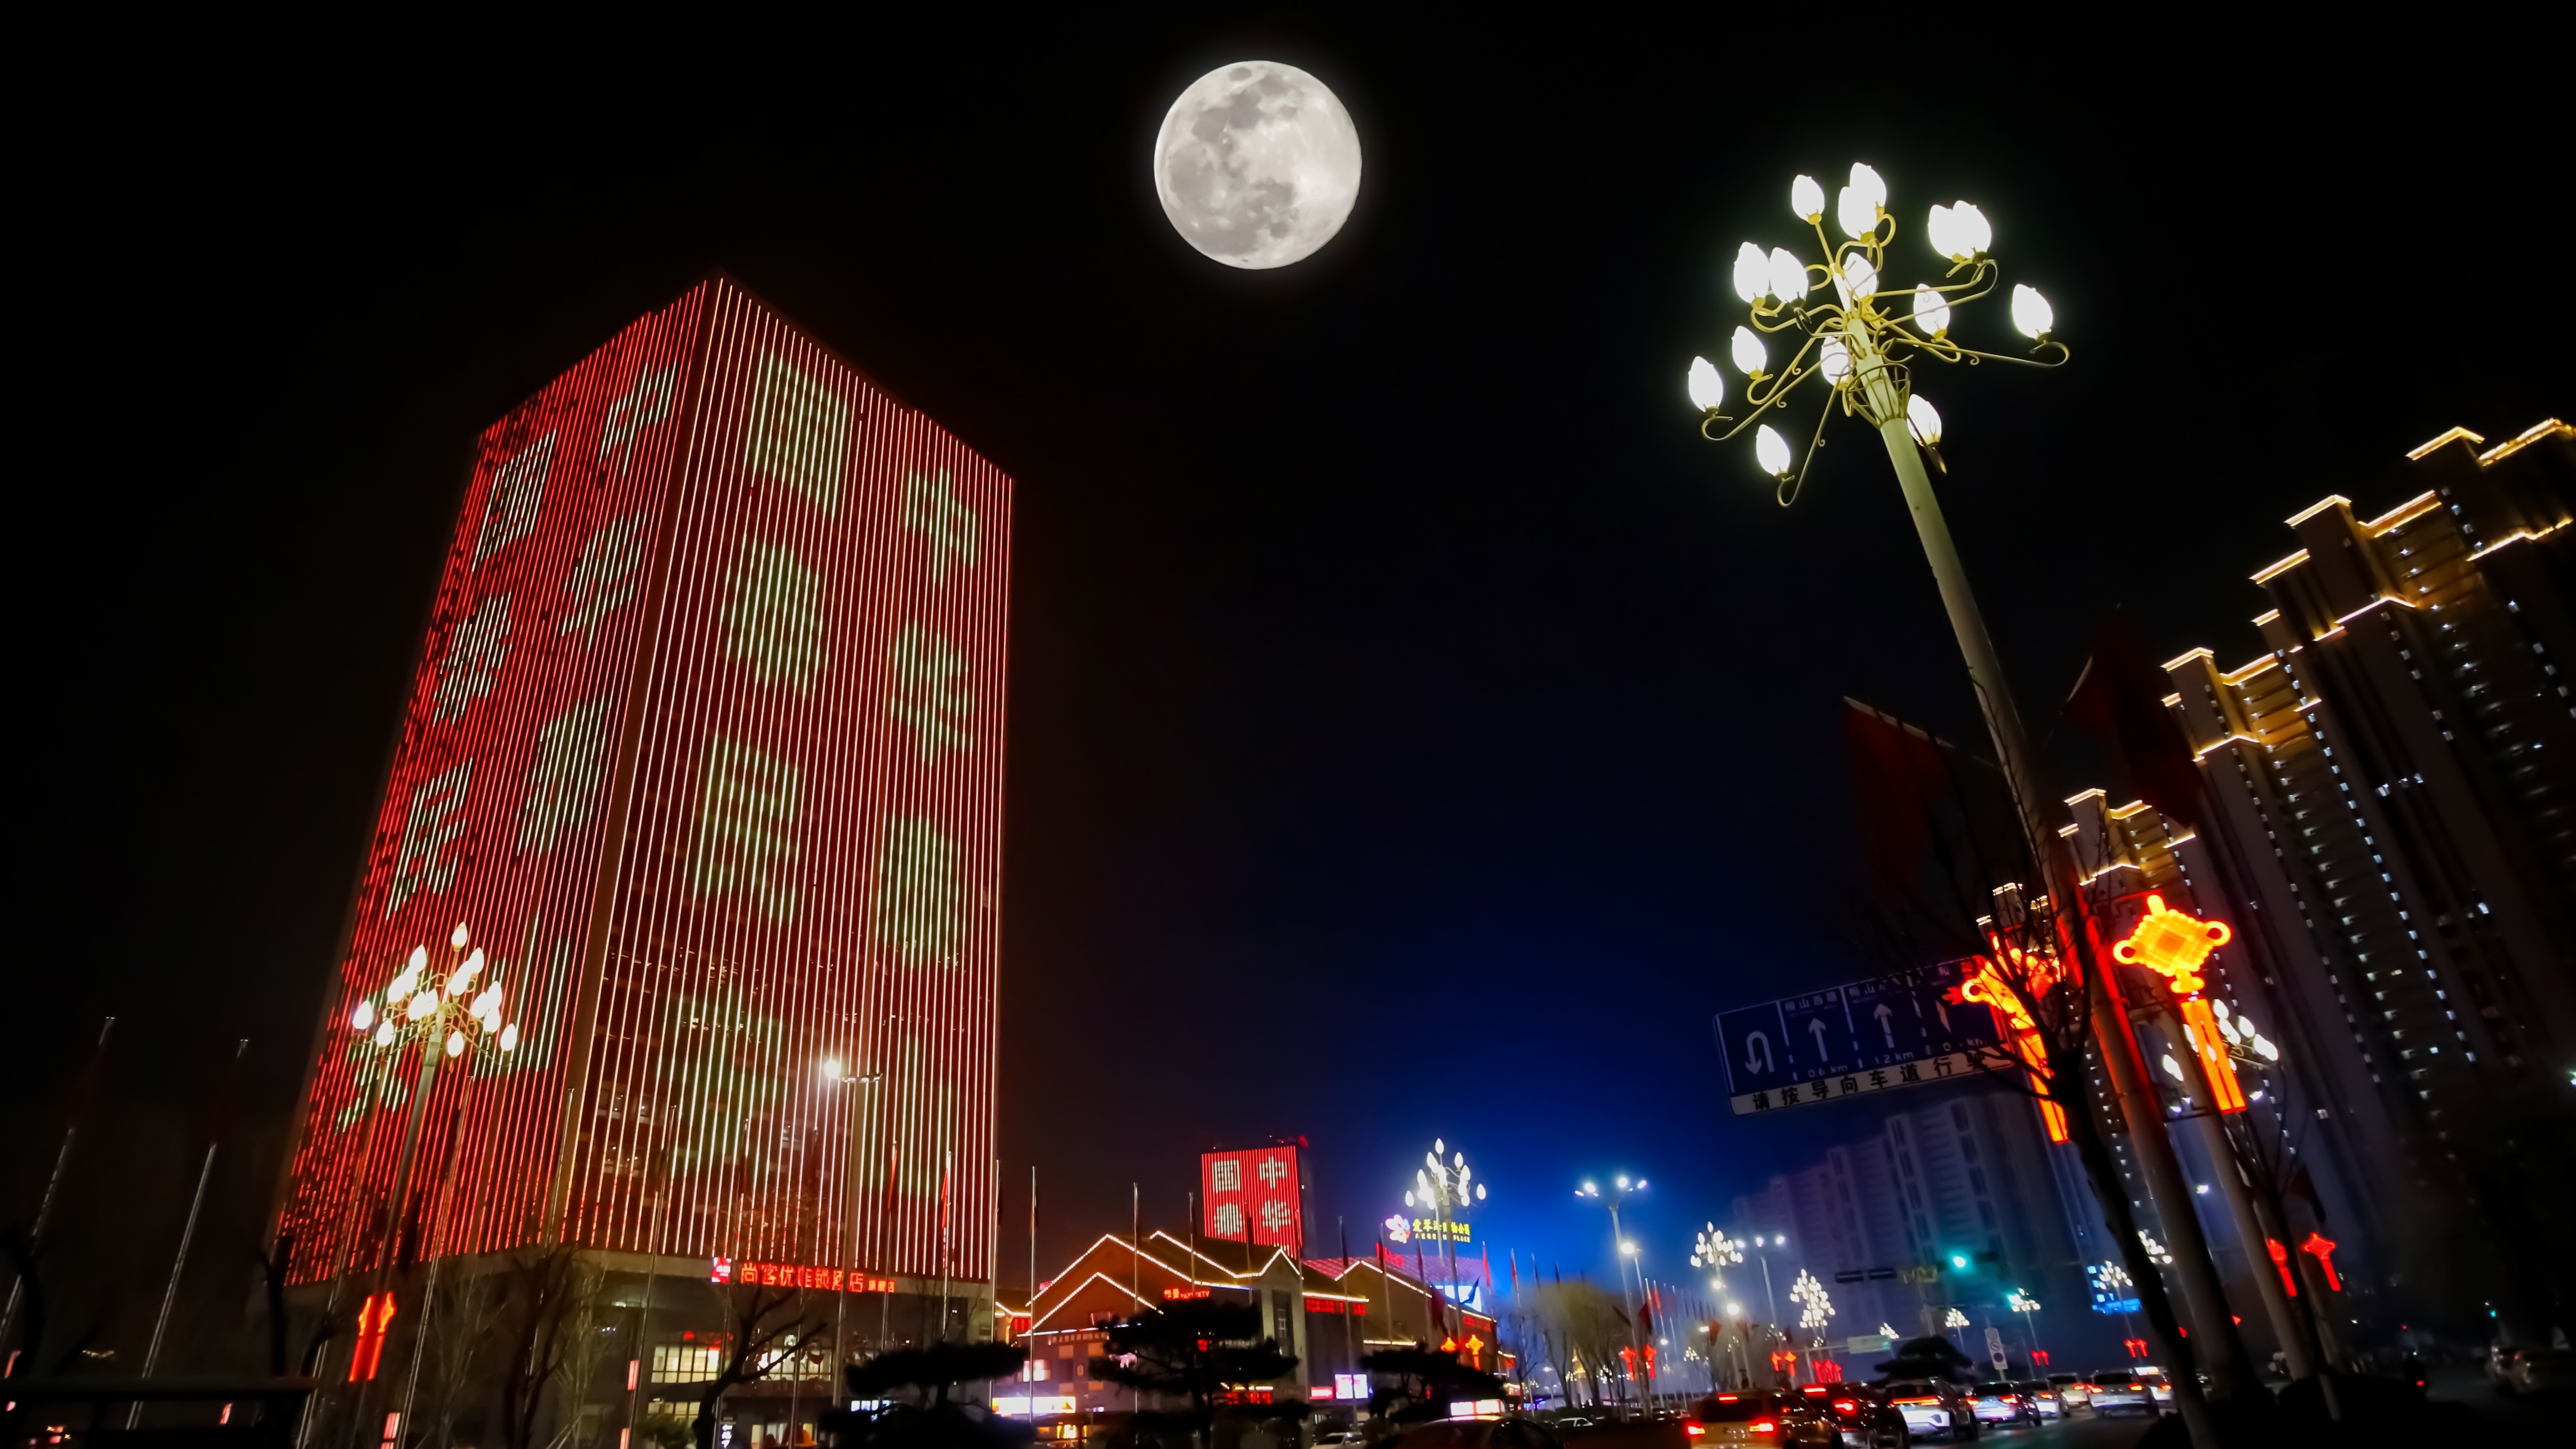 full moon over colorful buildings in china, including one building draped as a lantern in chinese characters